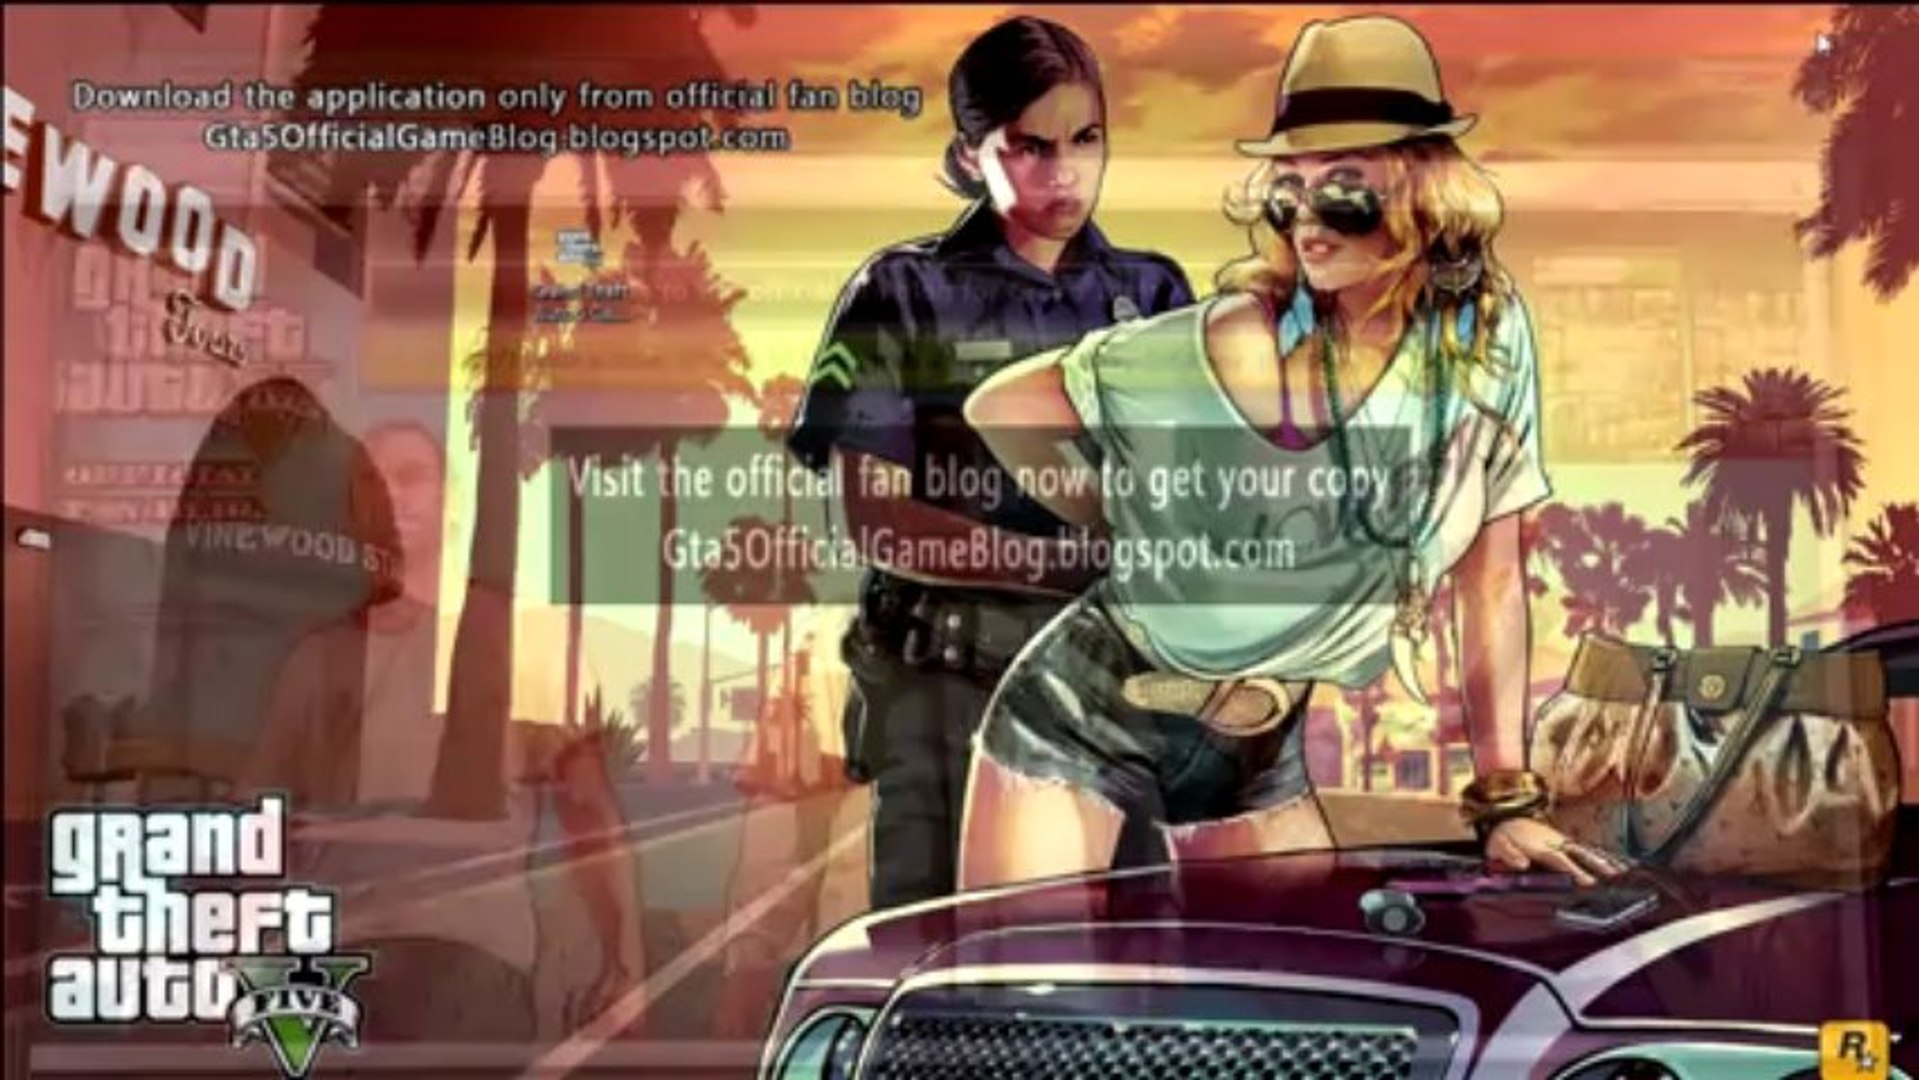 Grand Theft Auto 5 Free Redeem Code On Xbox360/PS3 - video Dailymotion